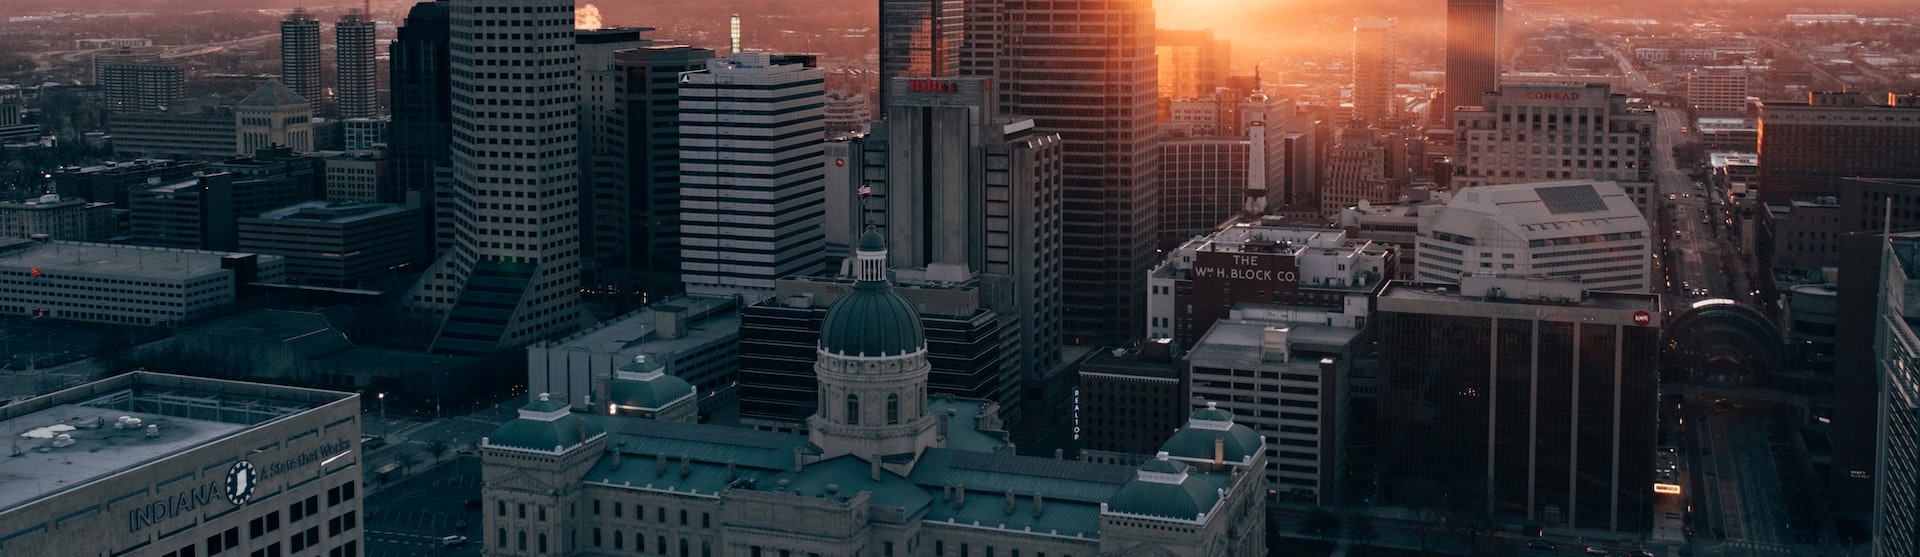 Airial view of buildings in Indianapolis at sunset | Breast Cancer Car Donations